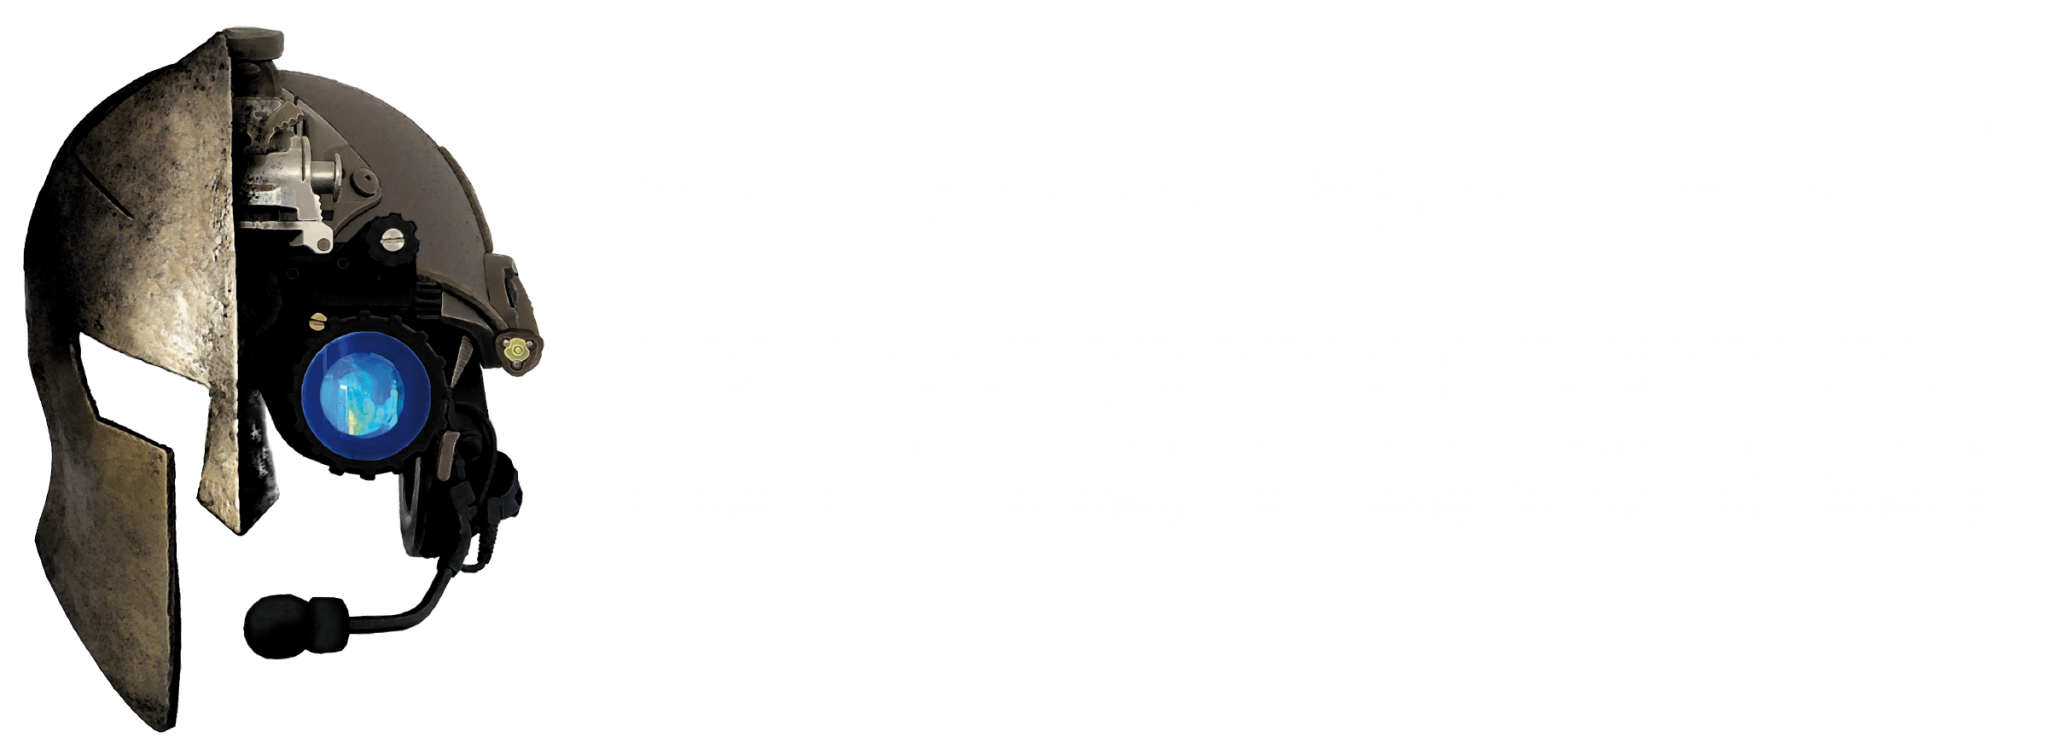 to serve the story®